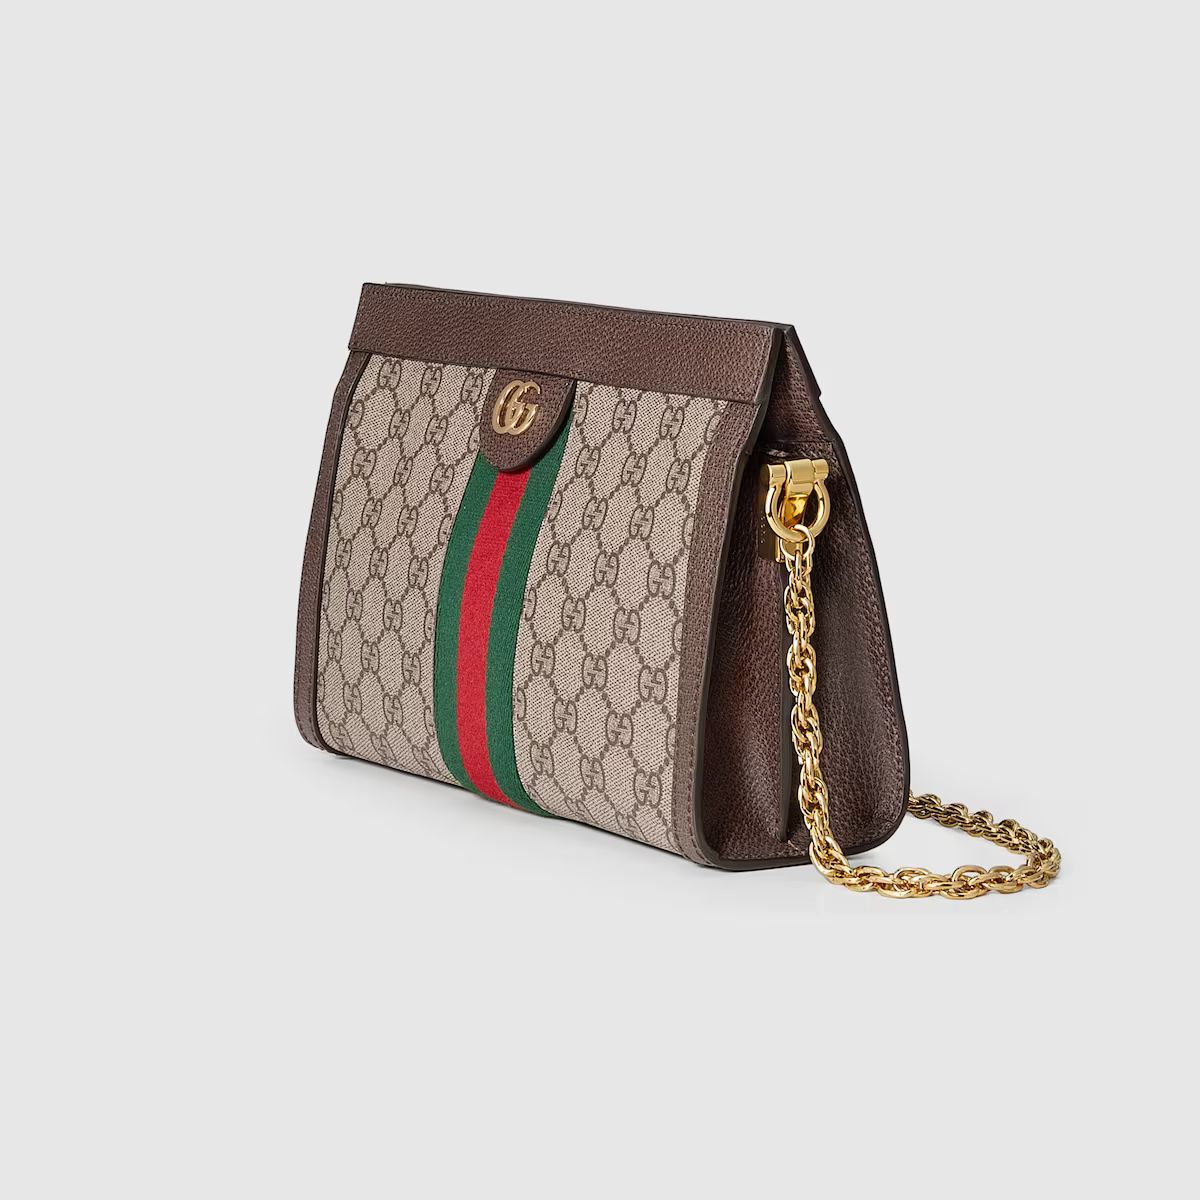 Gucci Ophidia GG small shoulder bag | Gucci (US)